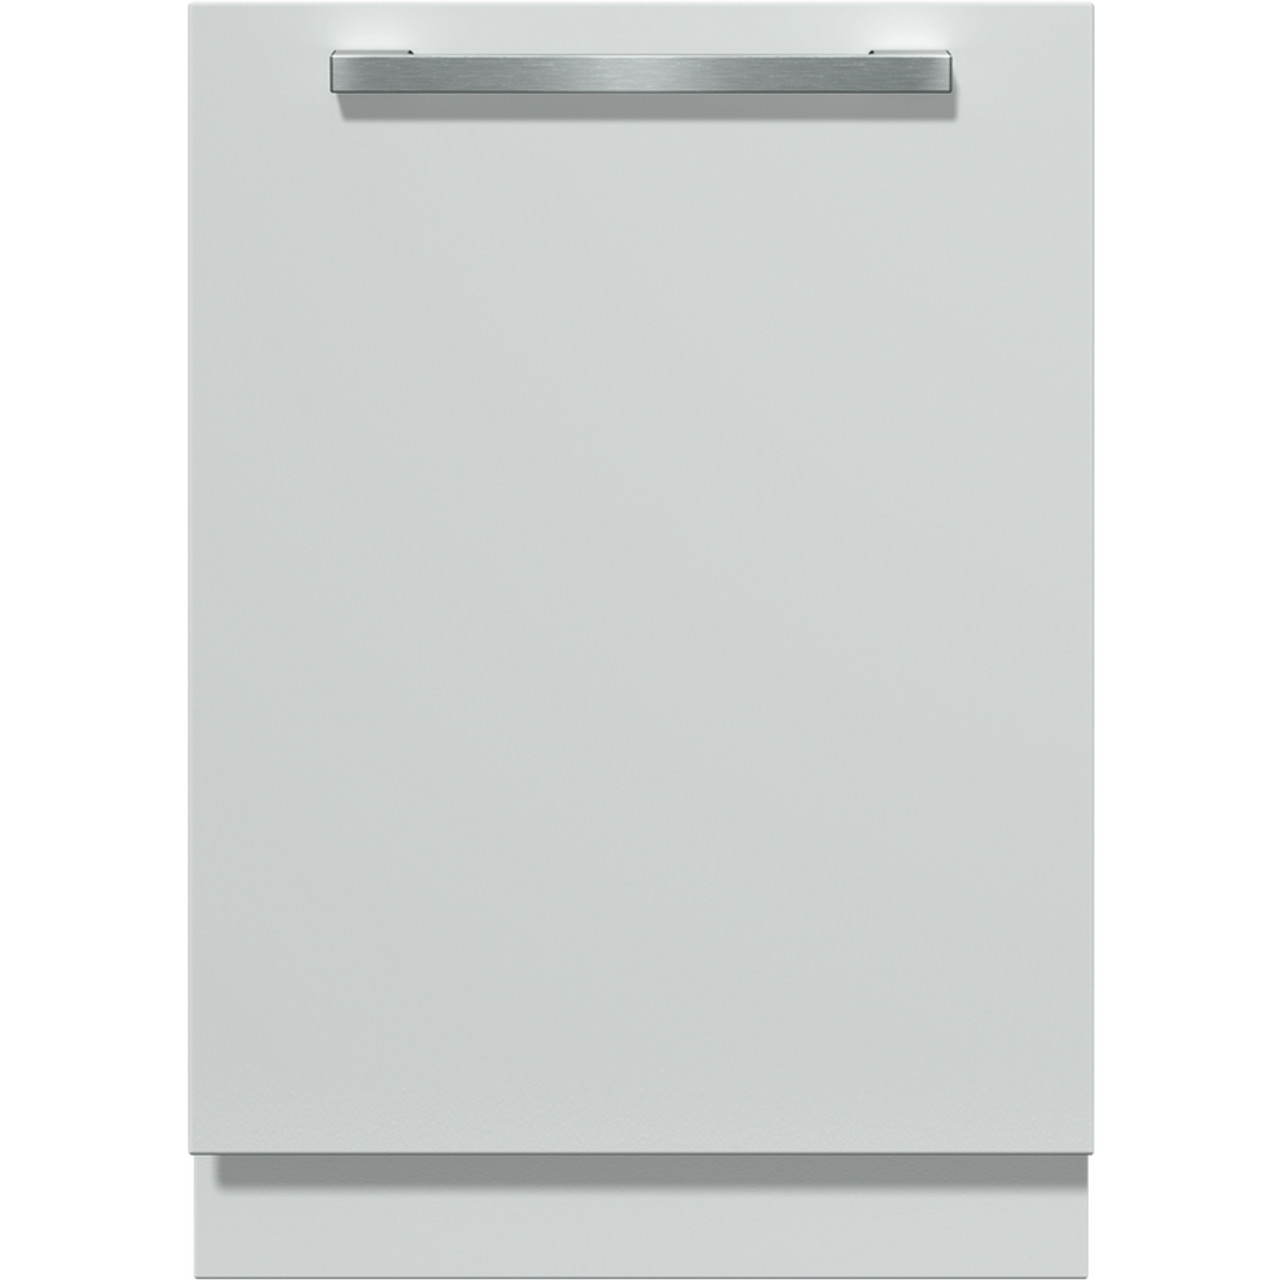 G7369SCVIXXL - Generation 7000 Xxl Fully Integrated Dishwasher With Autodos - Integrated